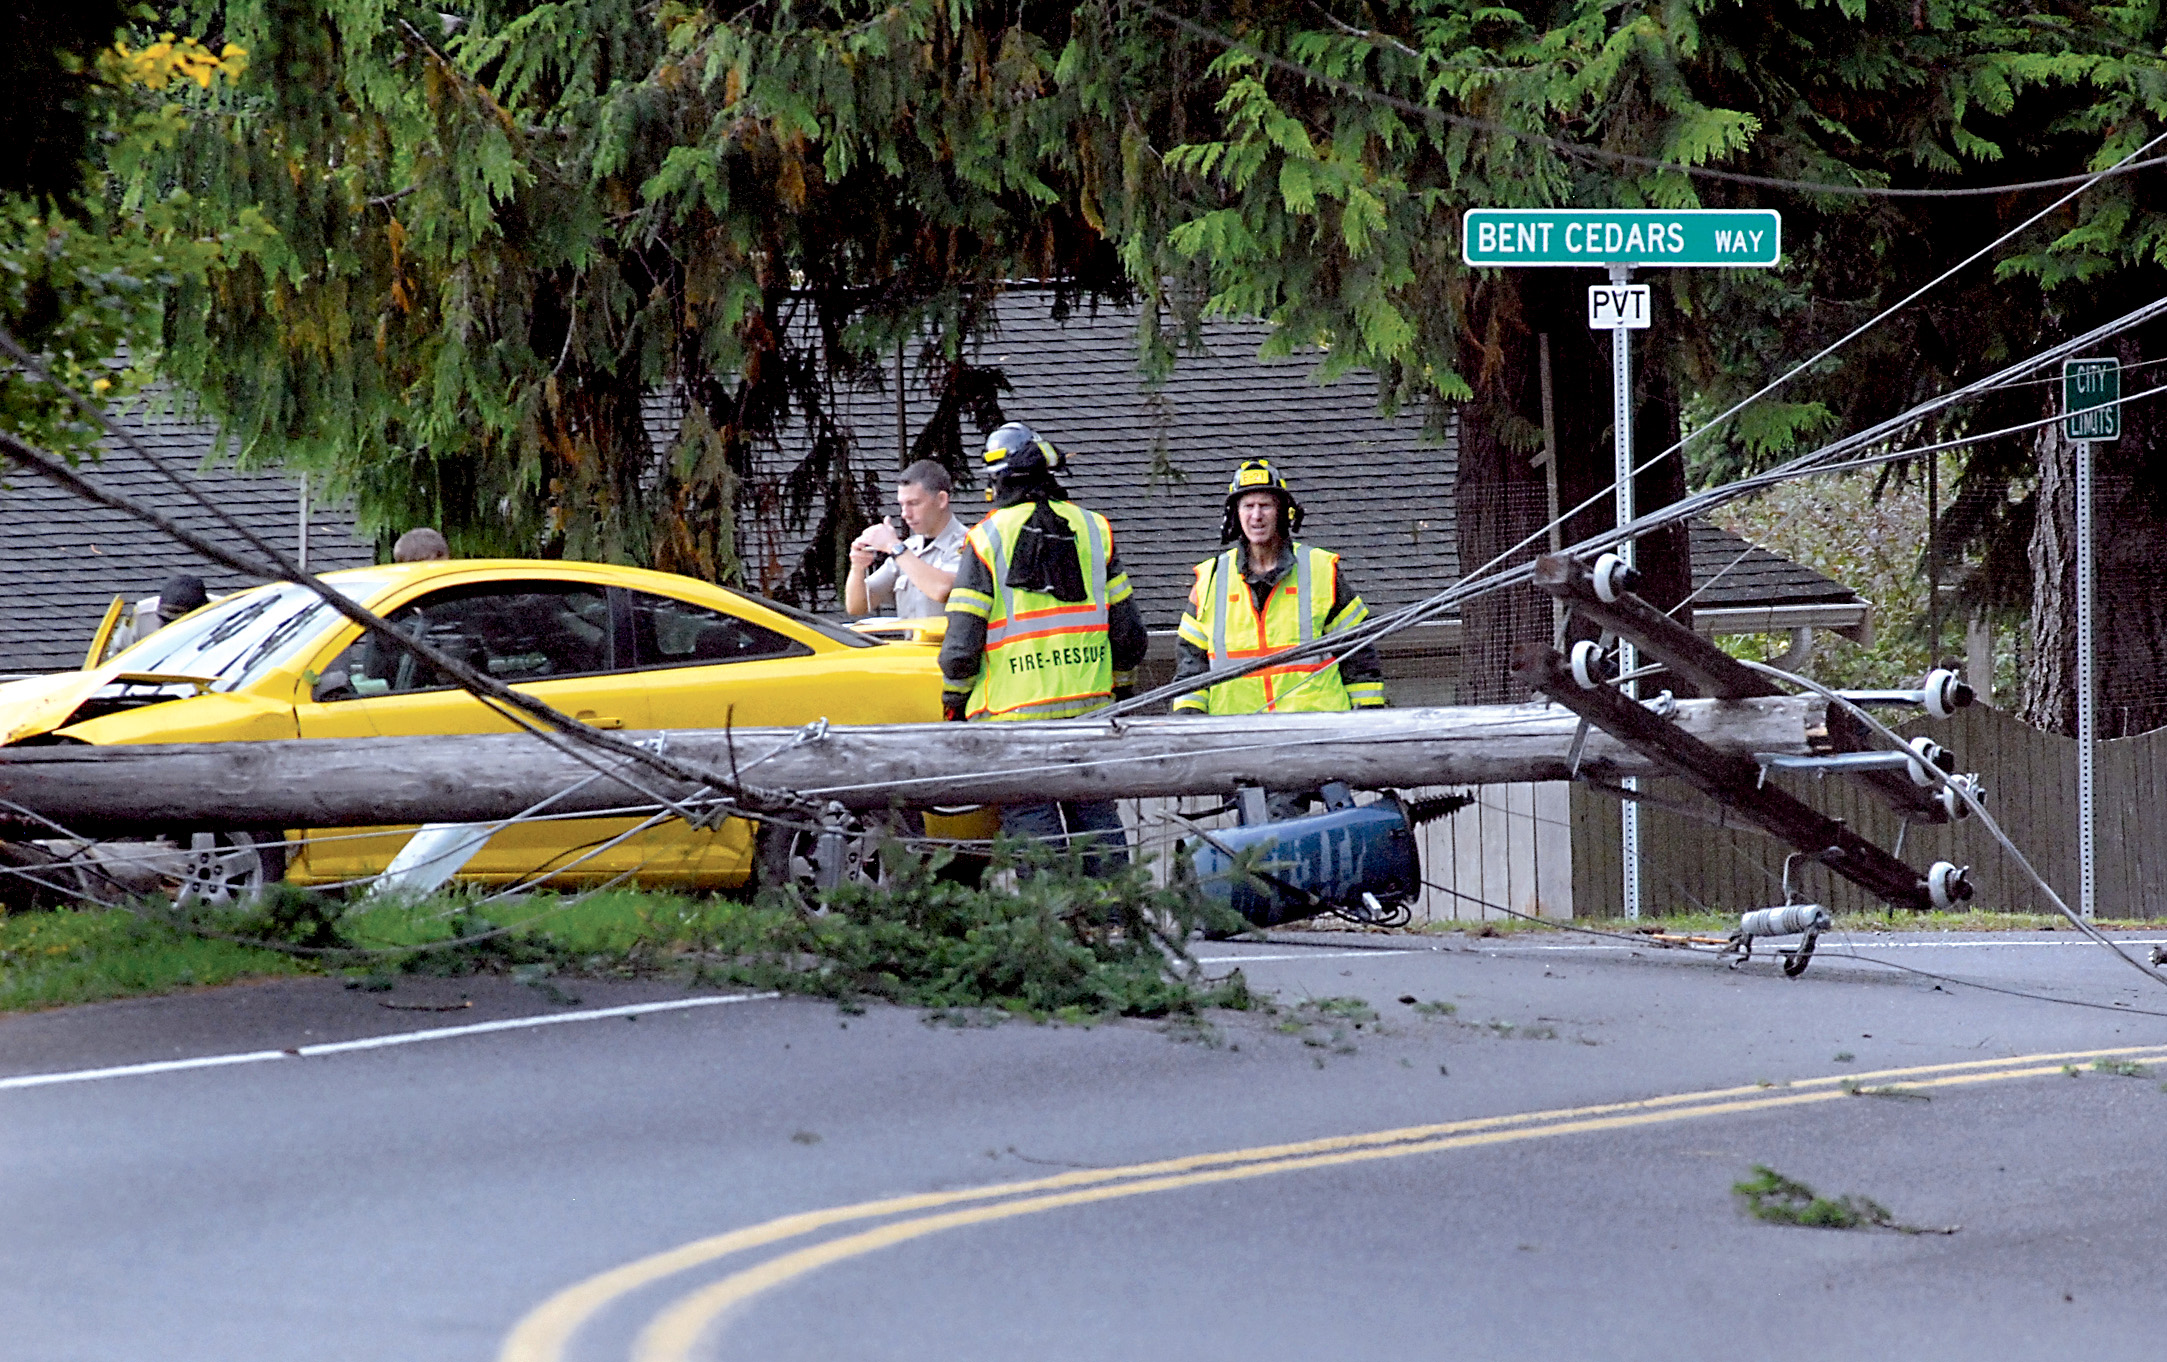 Clallam County Sheriff's deputies and rescue workers from Clallam County Fire District No. 2 investigate the scene where a car struck a utility pole on Mount Angeles Road at Bent Cedars Way near the south edge of Port Angeles today. Keith Thorpe/Peninsula Daily News